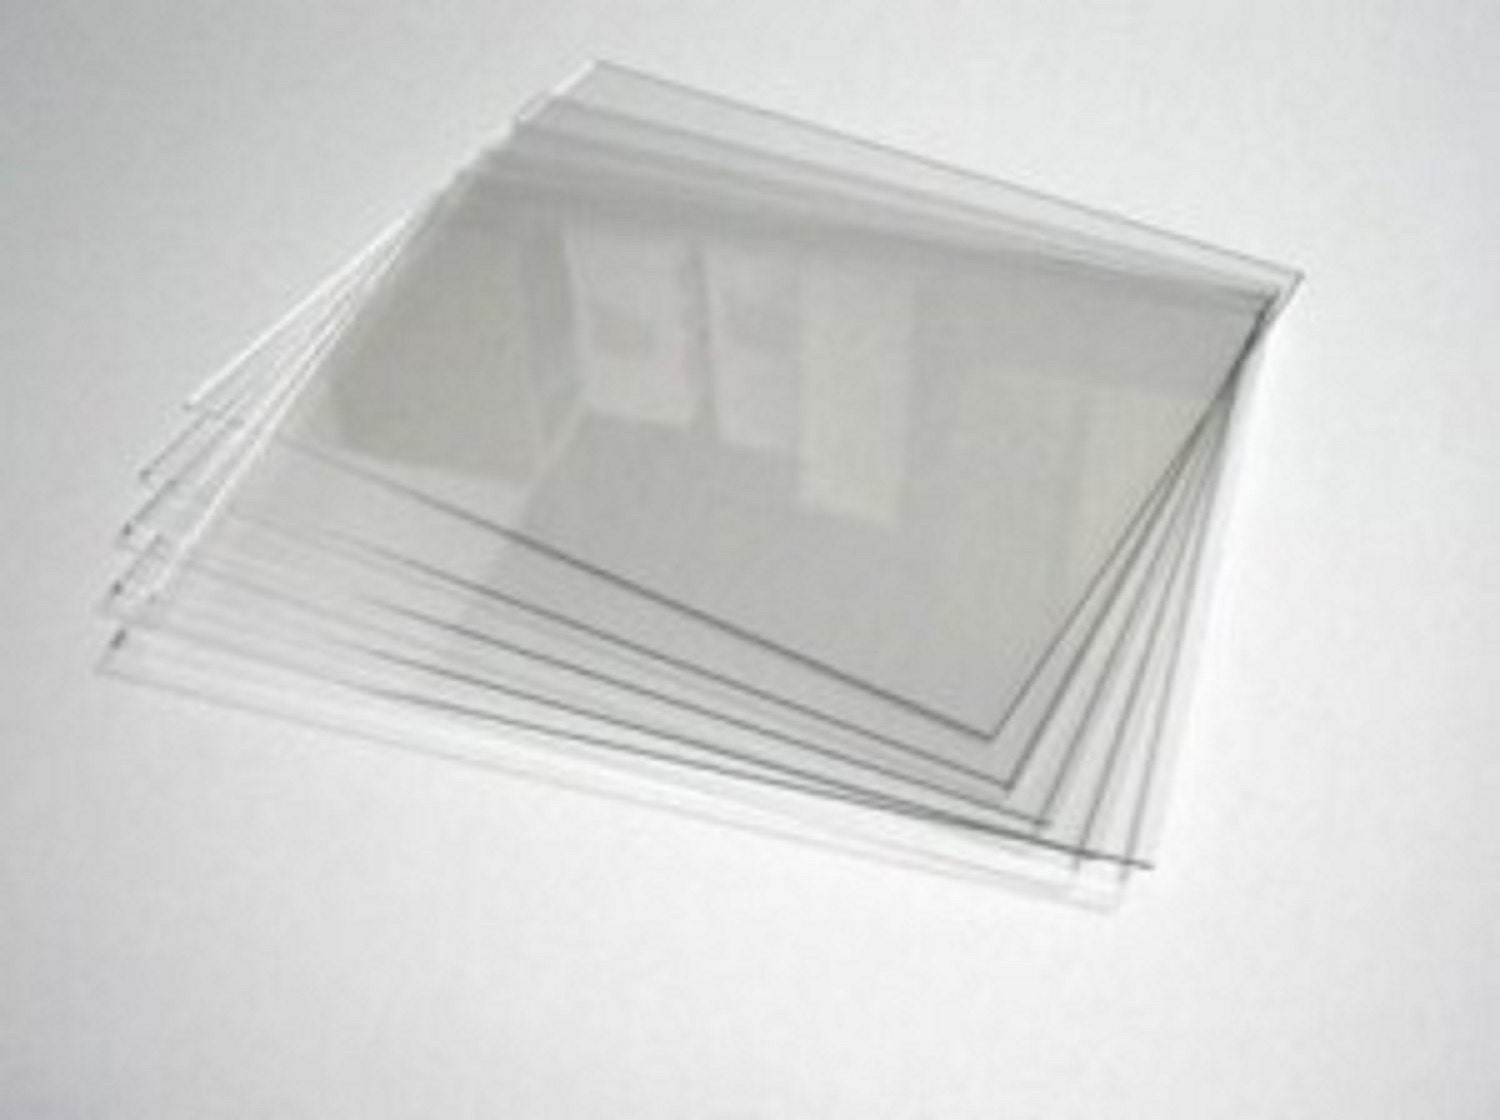 Sibe-r Plastic Supply SM Polycarbonate Clear Plastic Sheets 1/4 Thick 6 Mm  Pick Your Size 